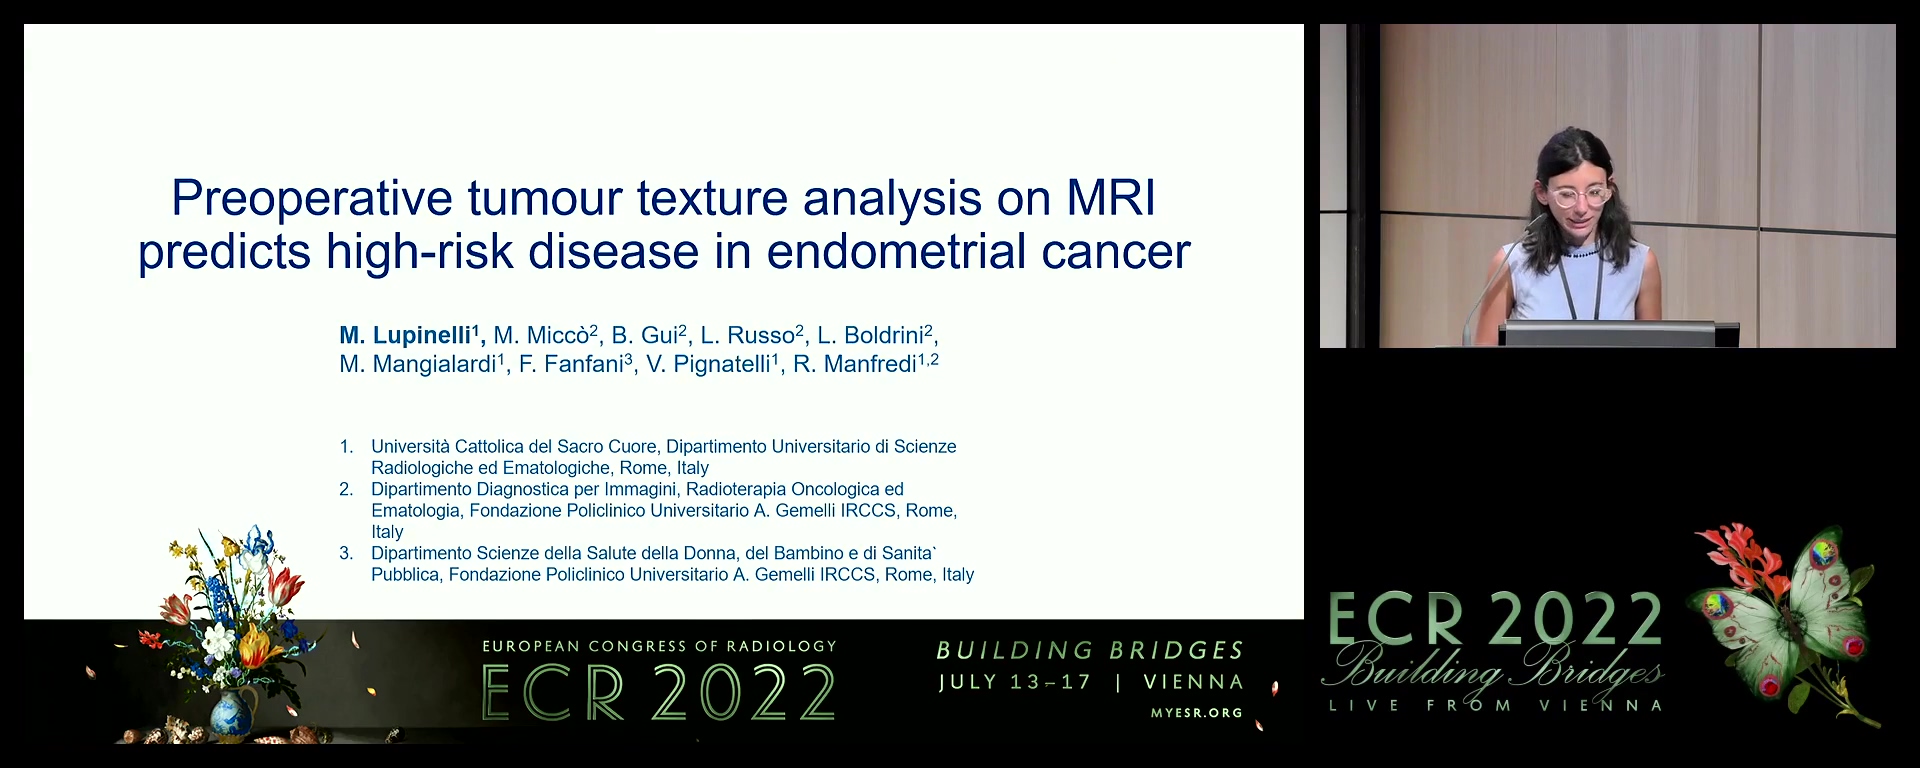 Preoperative tumour texture analysis on MRI predicts high-risk disease in endometrial cancer